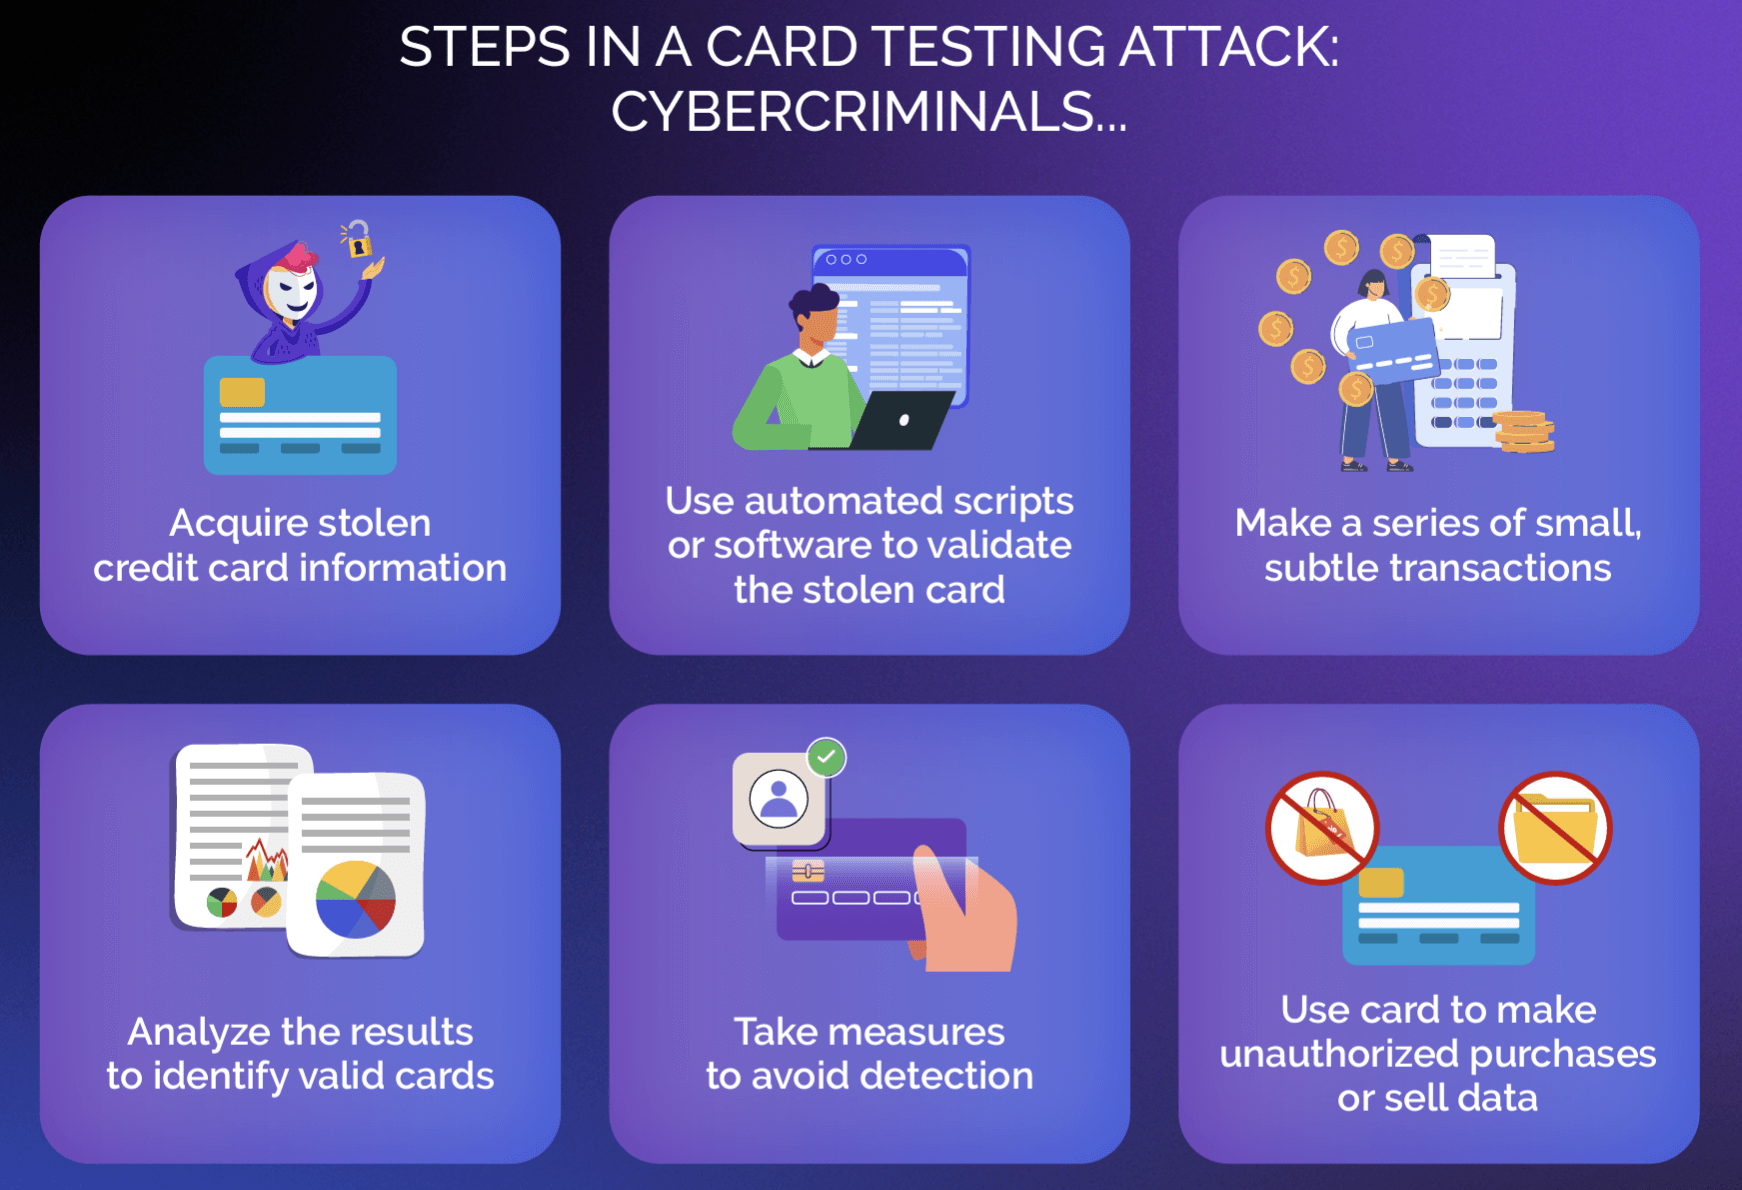 Basic steps cybercriminals take to determine whether a credit card is valid